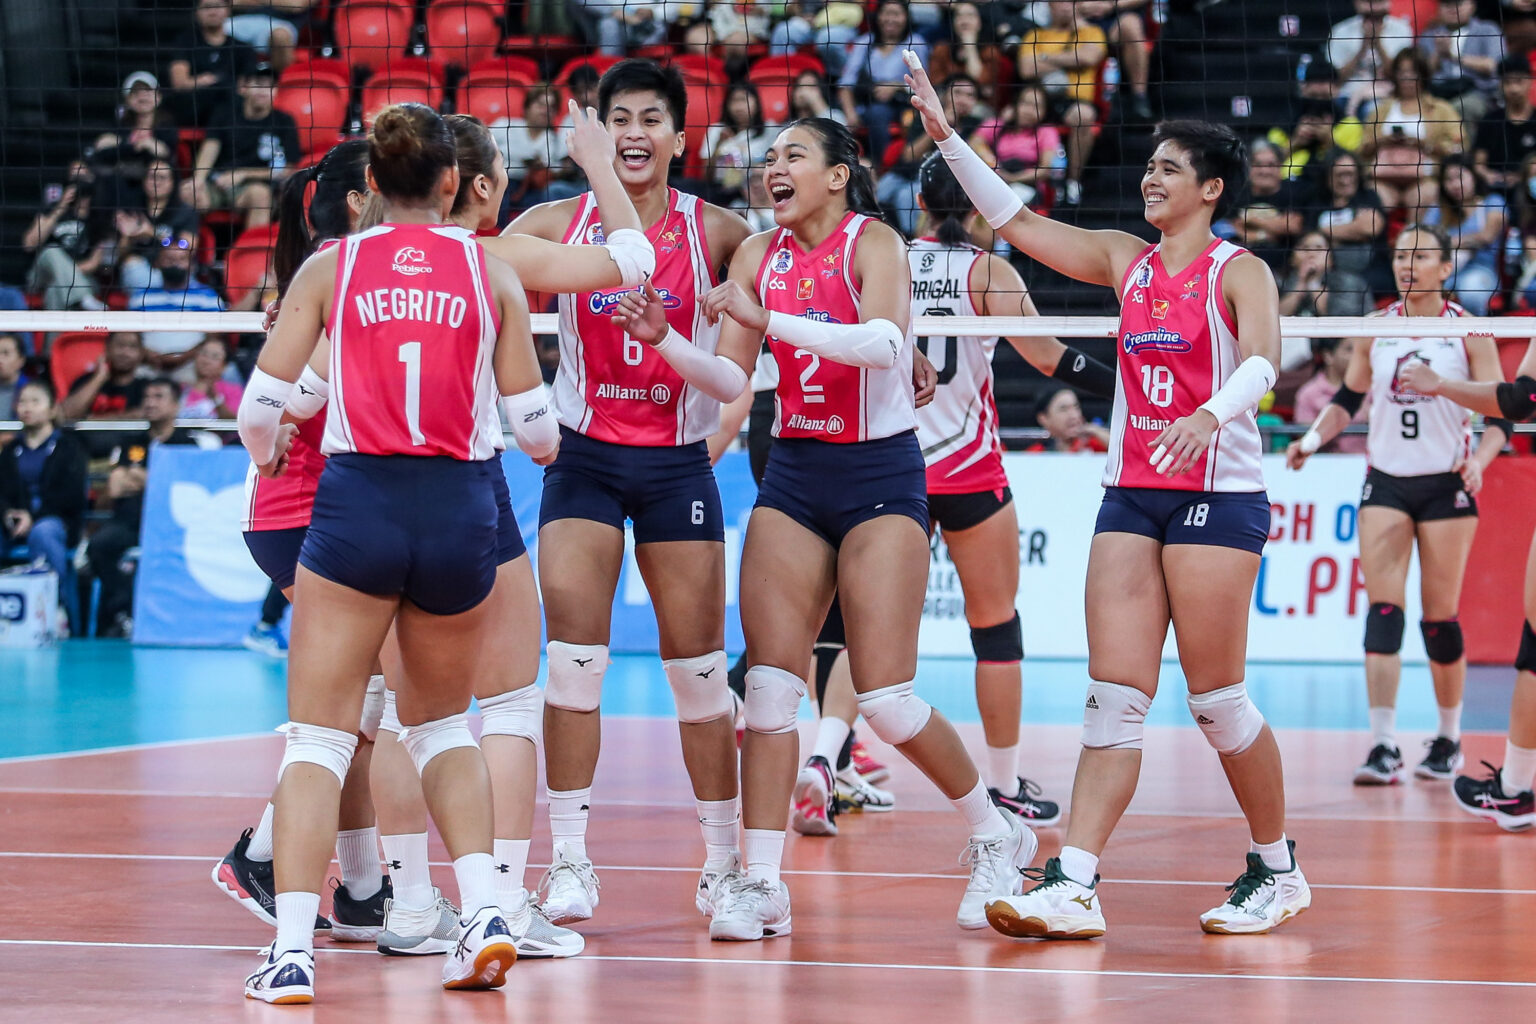 LIVE UPDATES: PVL All-Filipino Conference November 30 | Inquirer Sports